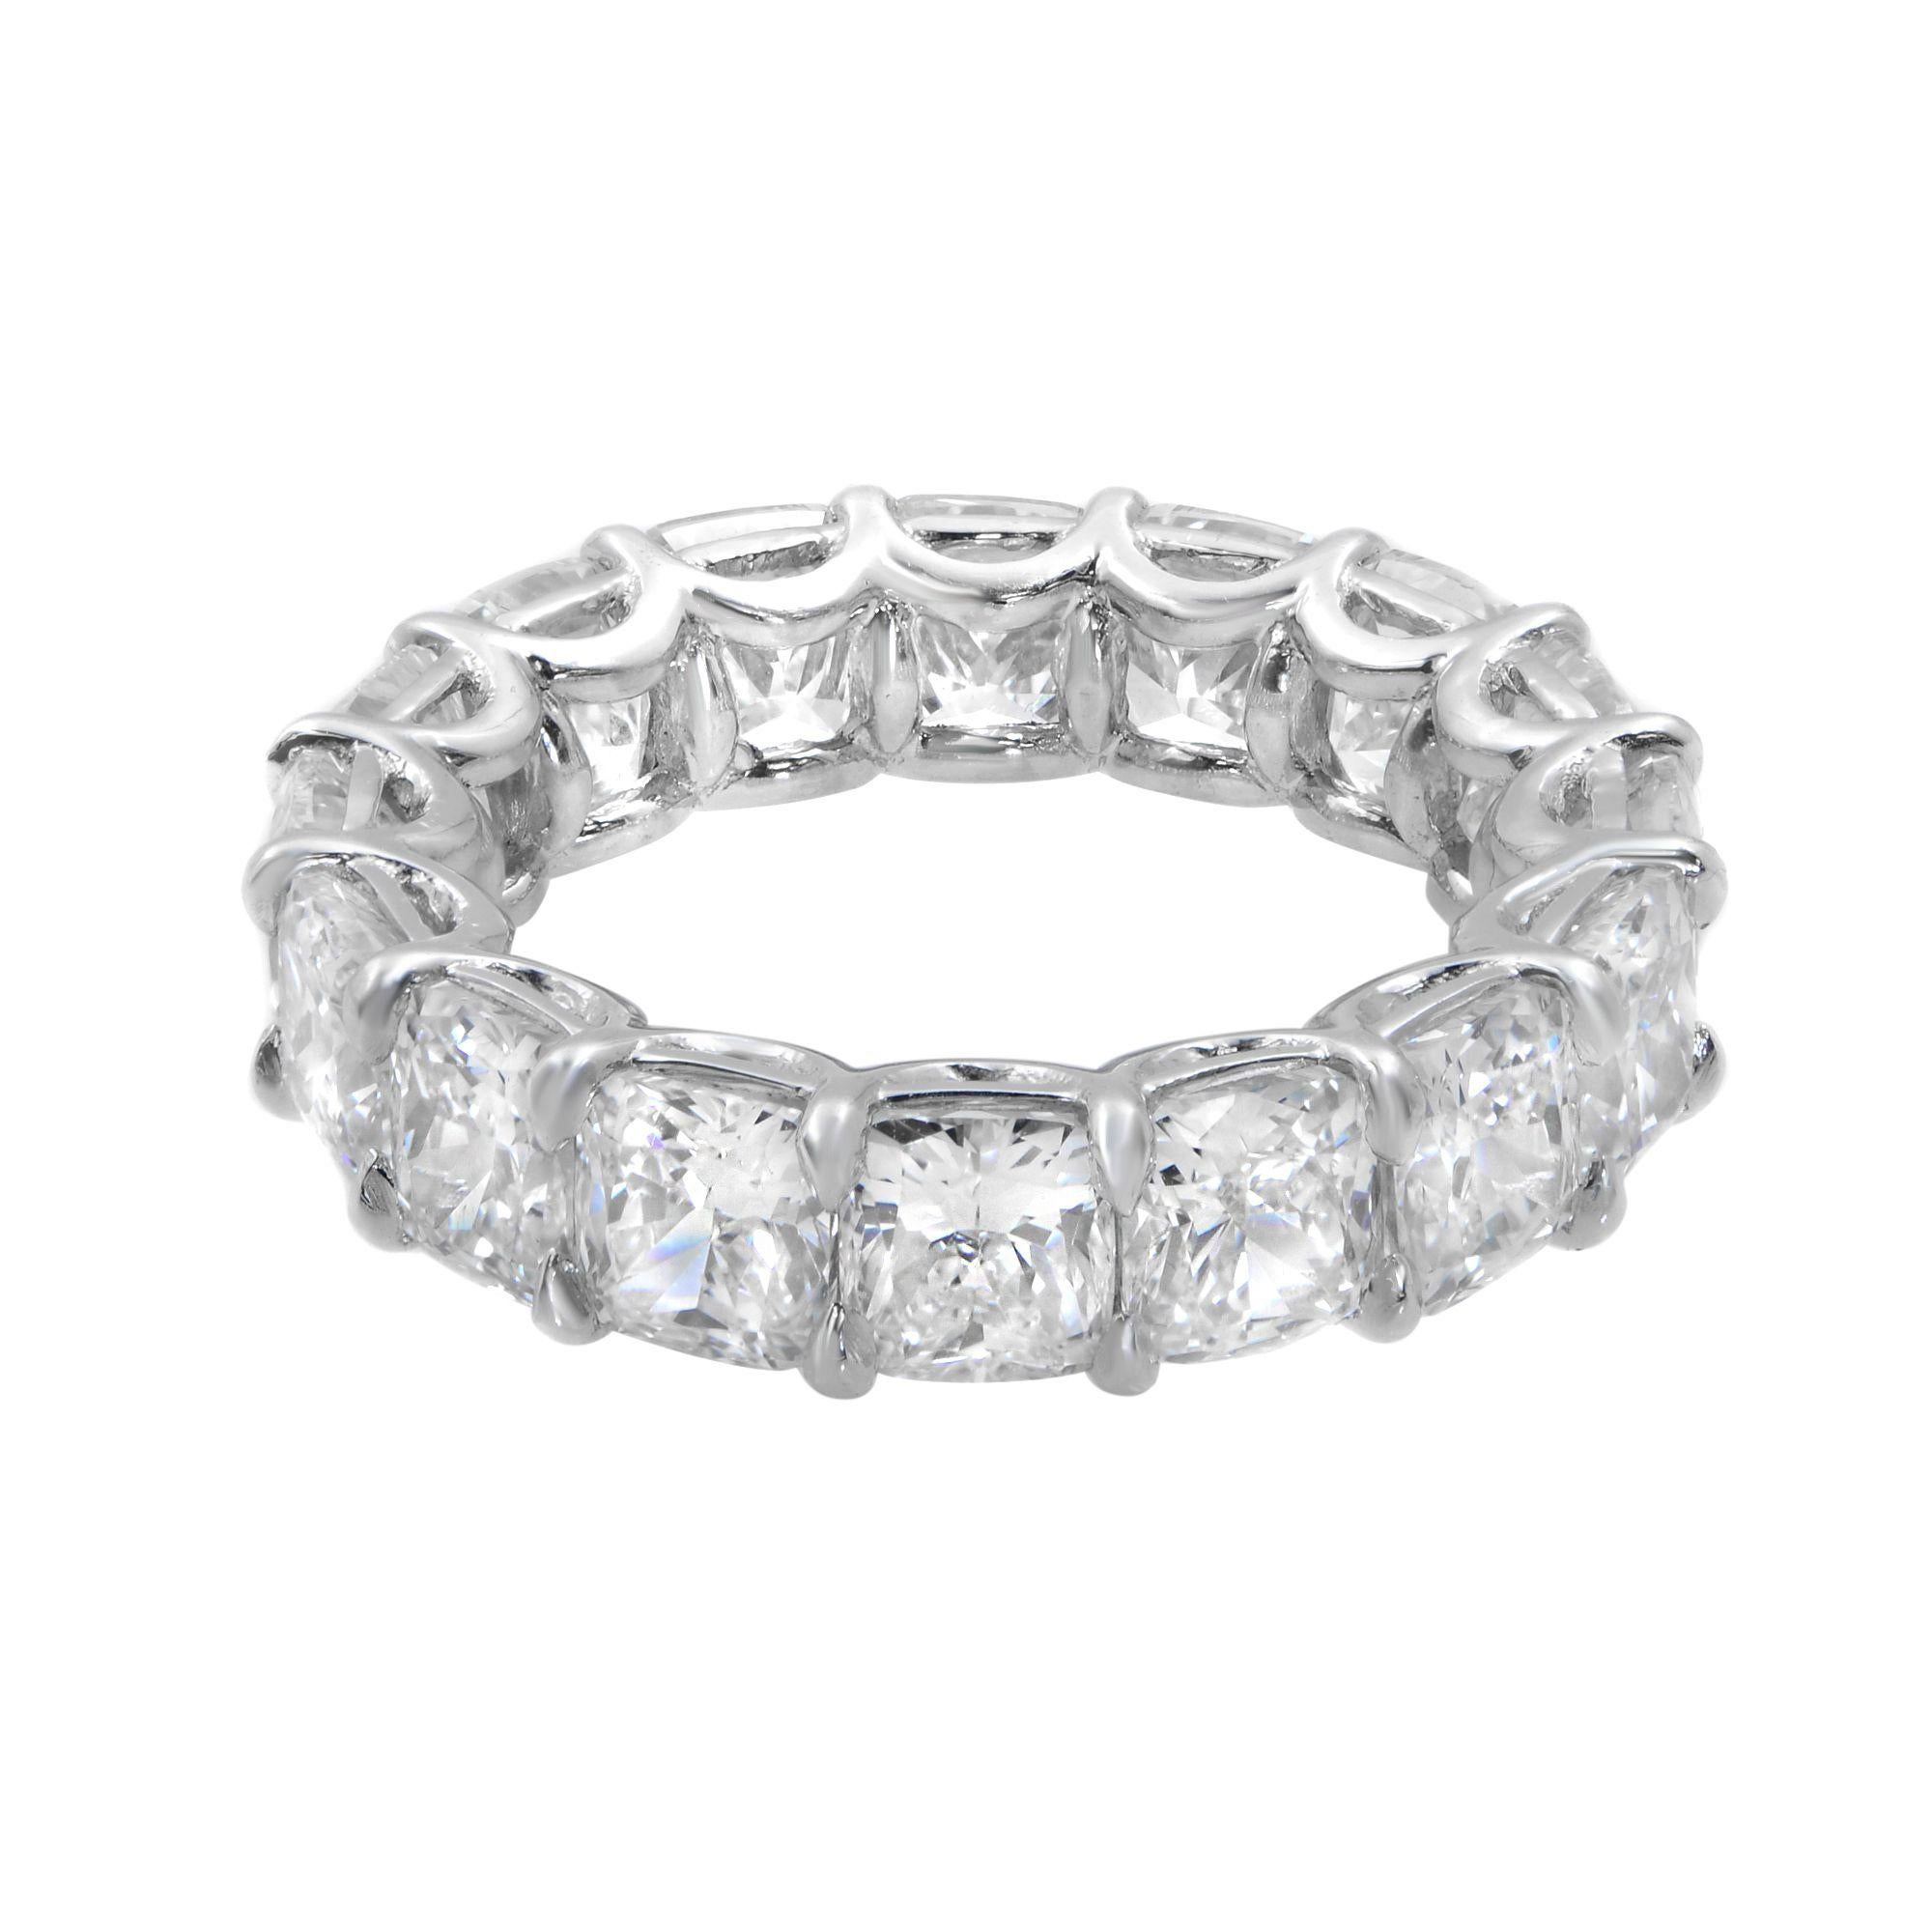 This beautiful eternity band ring is set with 16 perfectly matched cushion cut diamonds, each weighing between 0.70 carat. Each stone is G-H color and SI clarity. The total carat weight is 9.99. This band is crafted in platinum with ring size 5.5